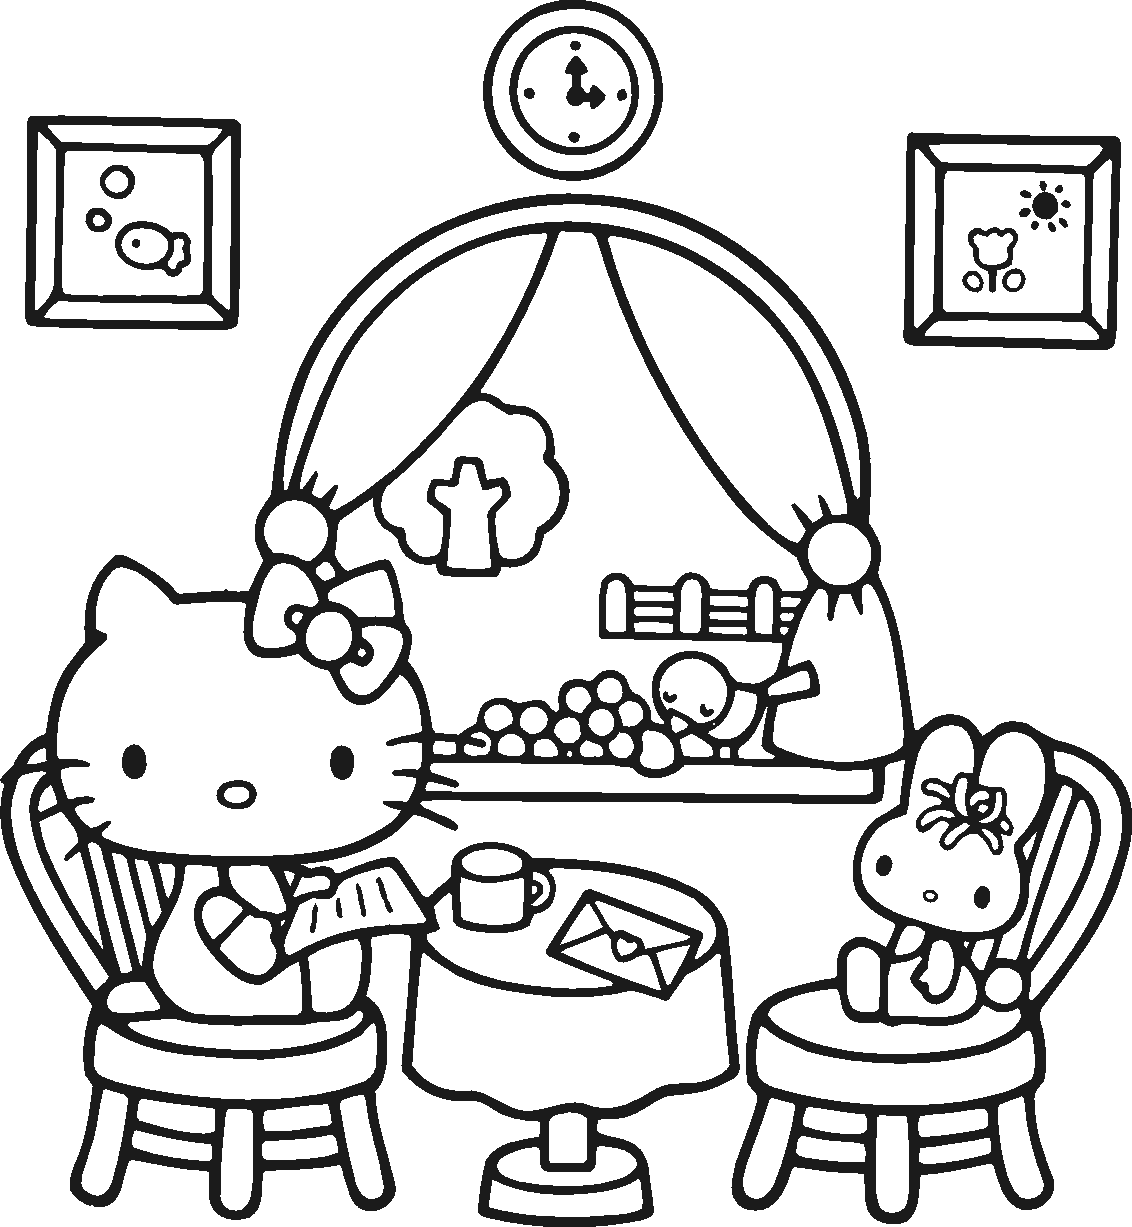 free-free-hello-kitty-valentine-coloring-pages-download-free-free-hello-kitty-valentine